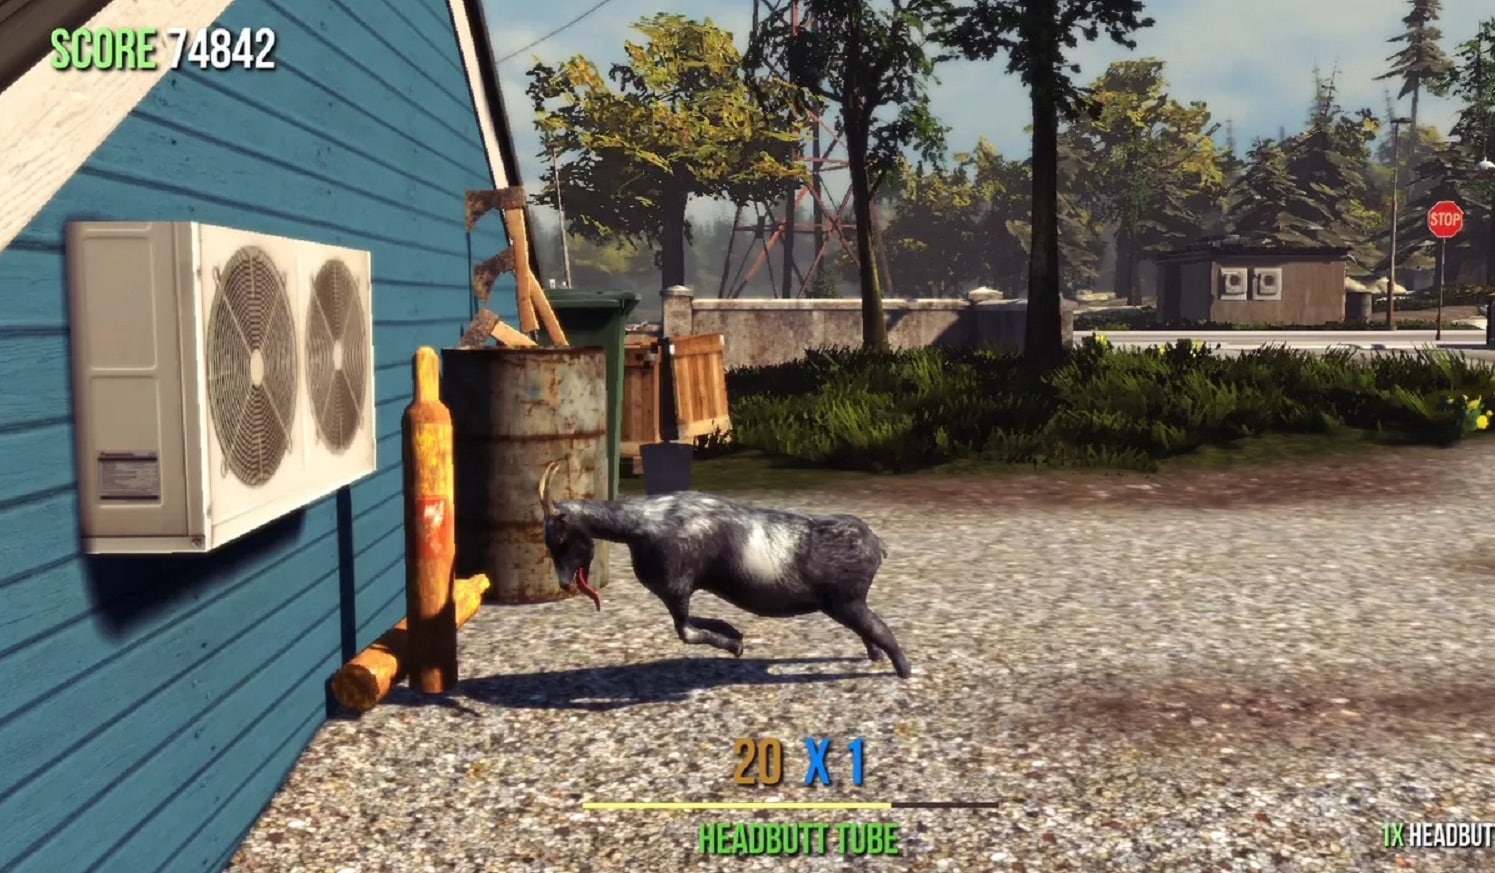 Can You Play Goat Simulator Online Xbox One Goat Simulator Guide Pc Playstation 3 Playstation 4 Xbox 360 And Xbox One Family Review